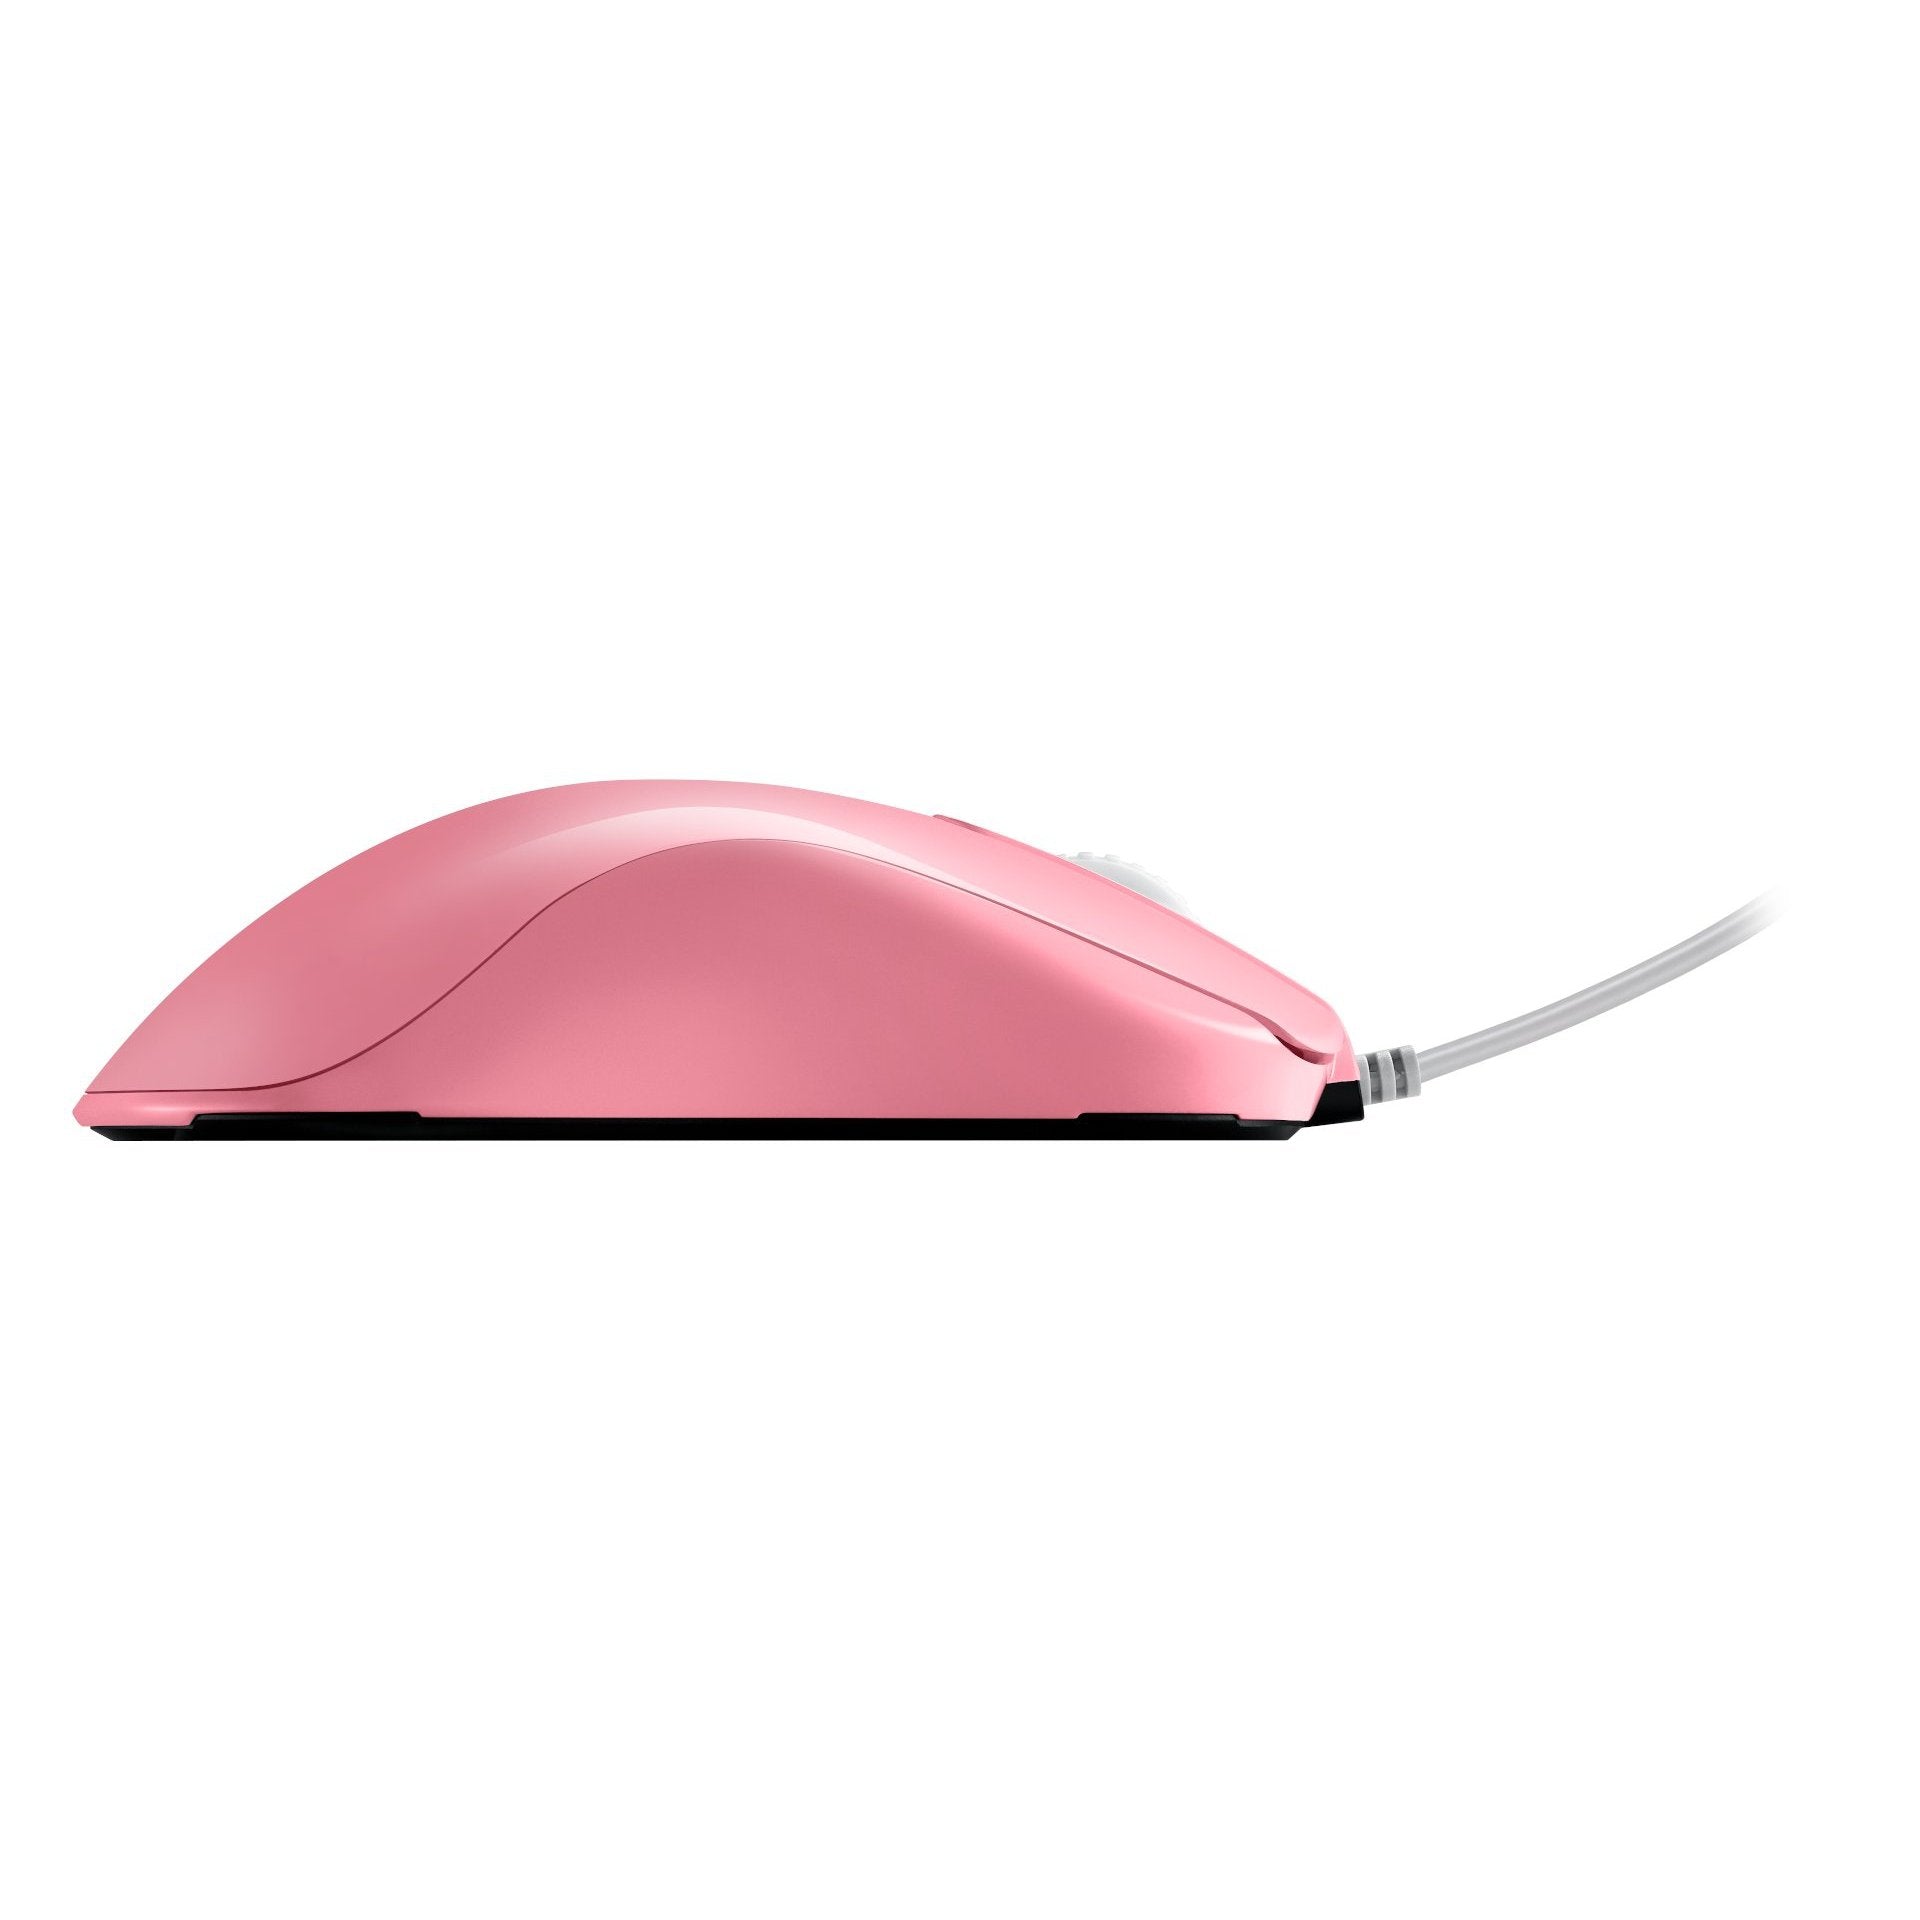 ZOWIE FK2-B DIVINA Pink eSports Mouse-Addice Inc